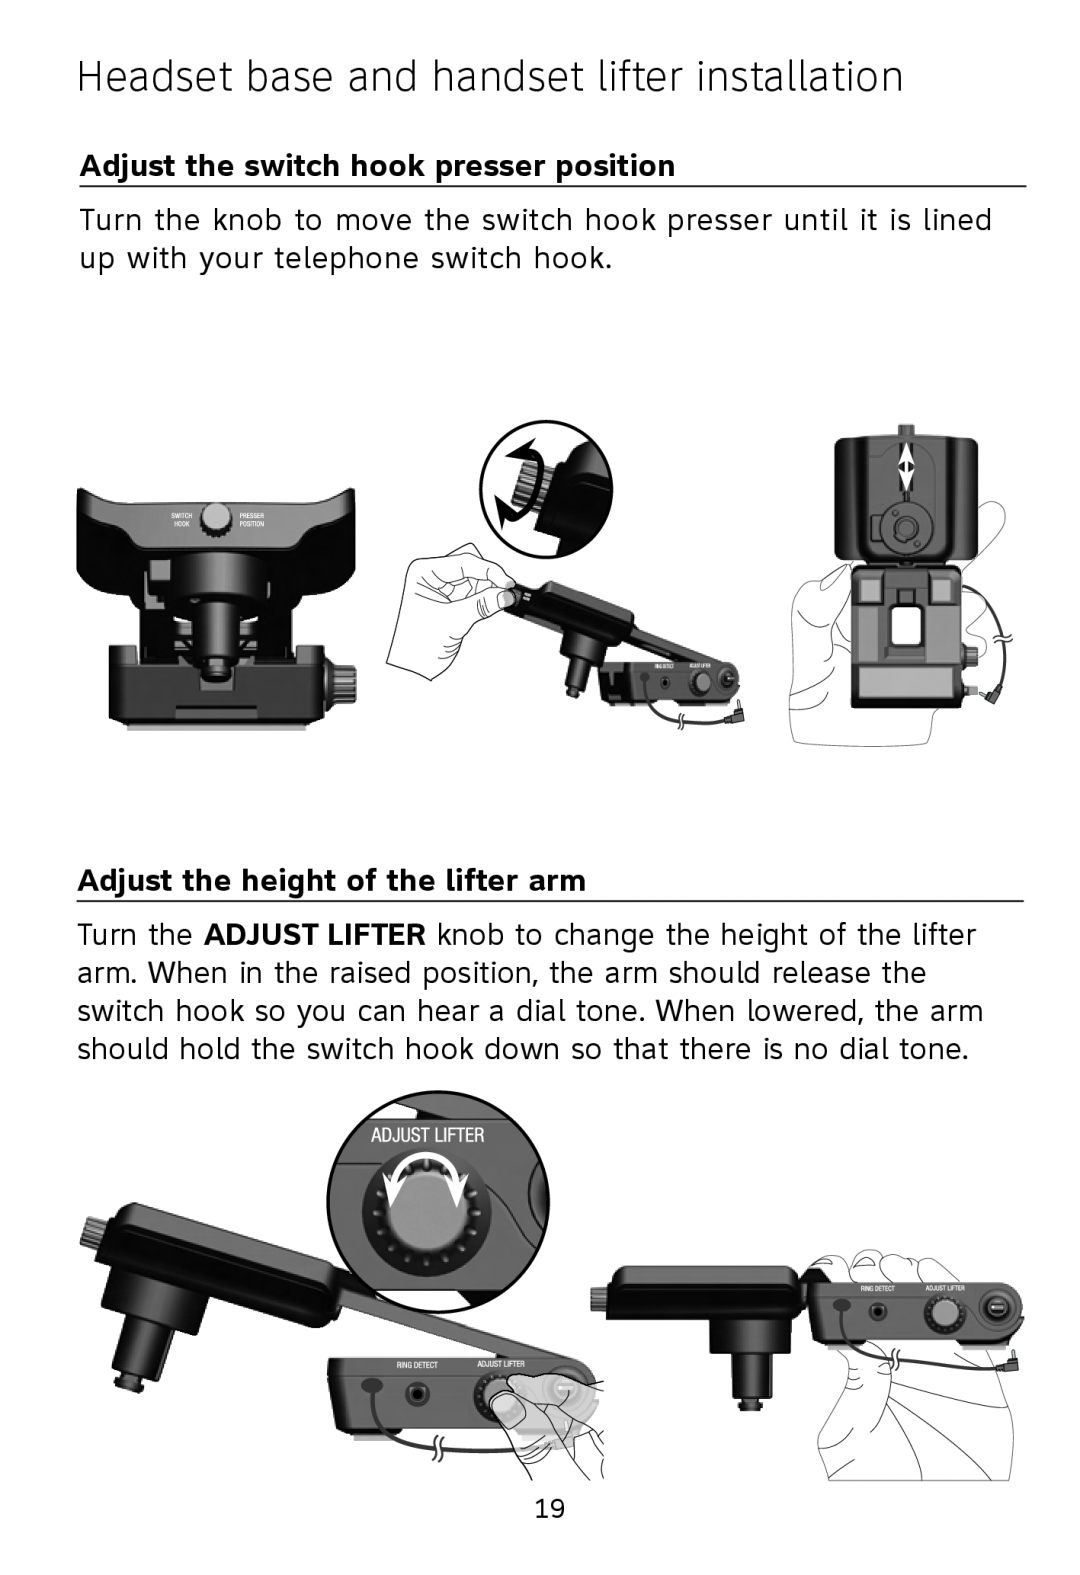 AT&T TL7612 quick start Adjust the switch hook presser position, Adjust the height of the lifter arm 